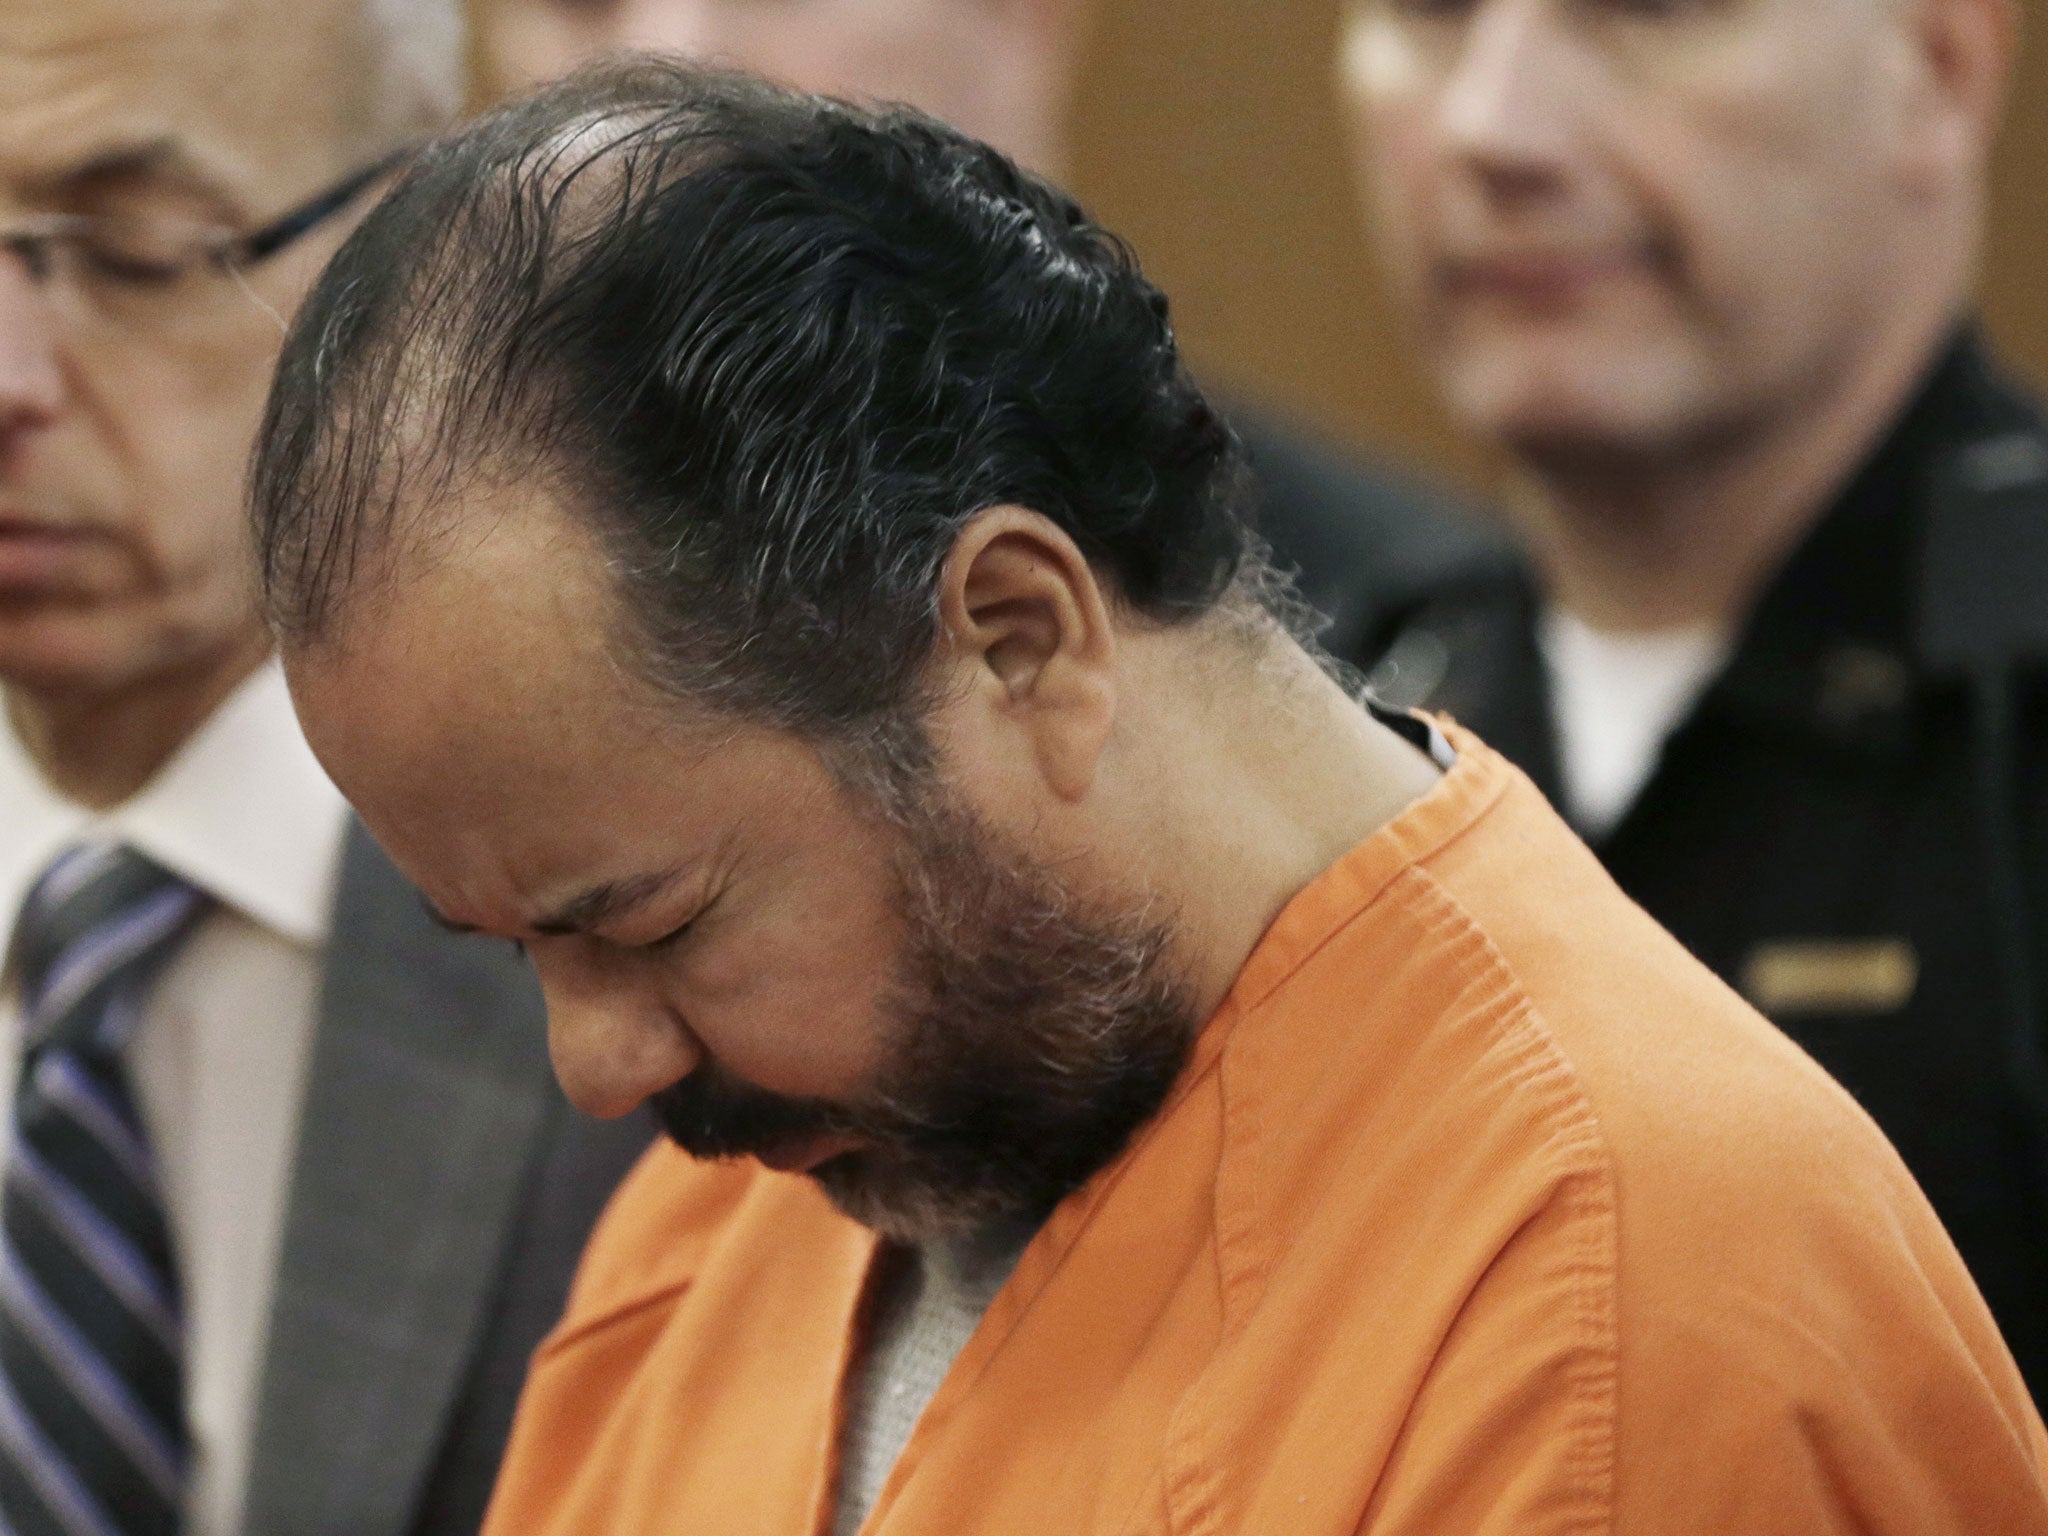 Ariel Castro held hree women captive in his home for around a decade